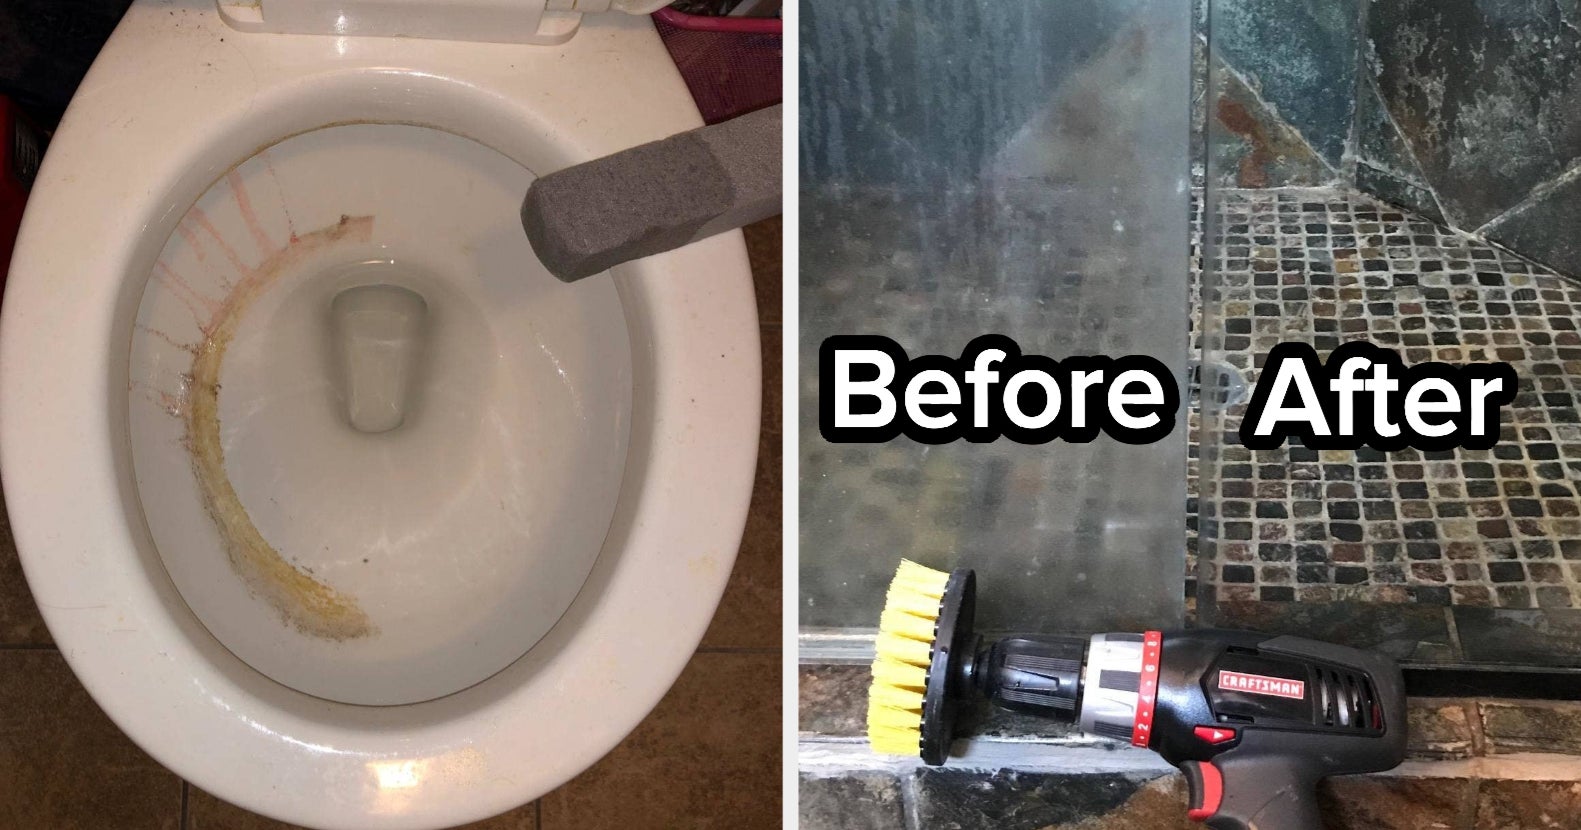 Professional cleaner reveals how a cheap pumice stone can clean